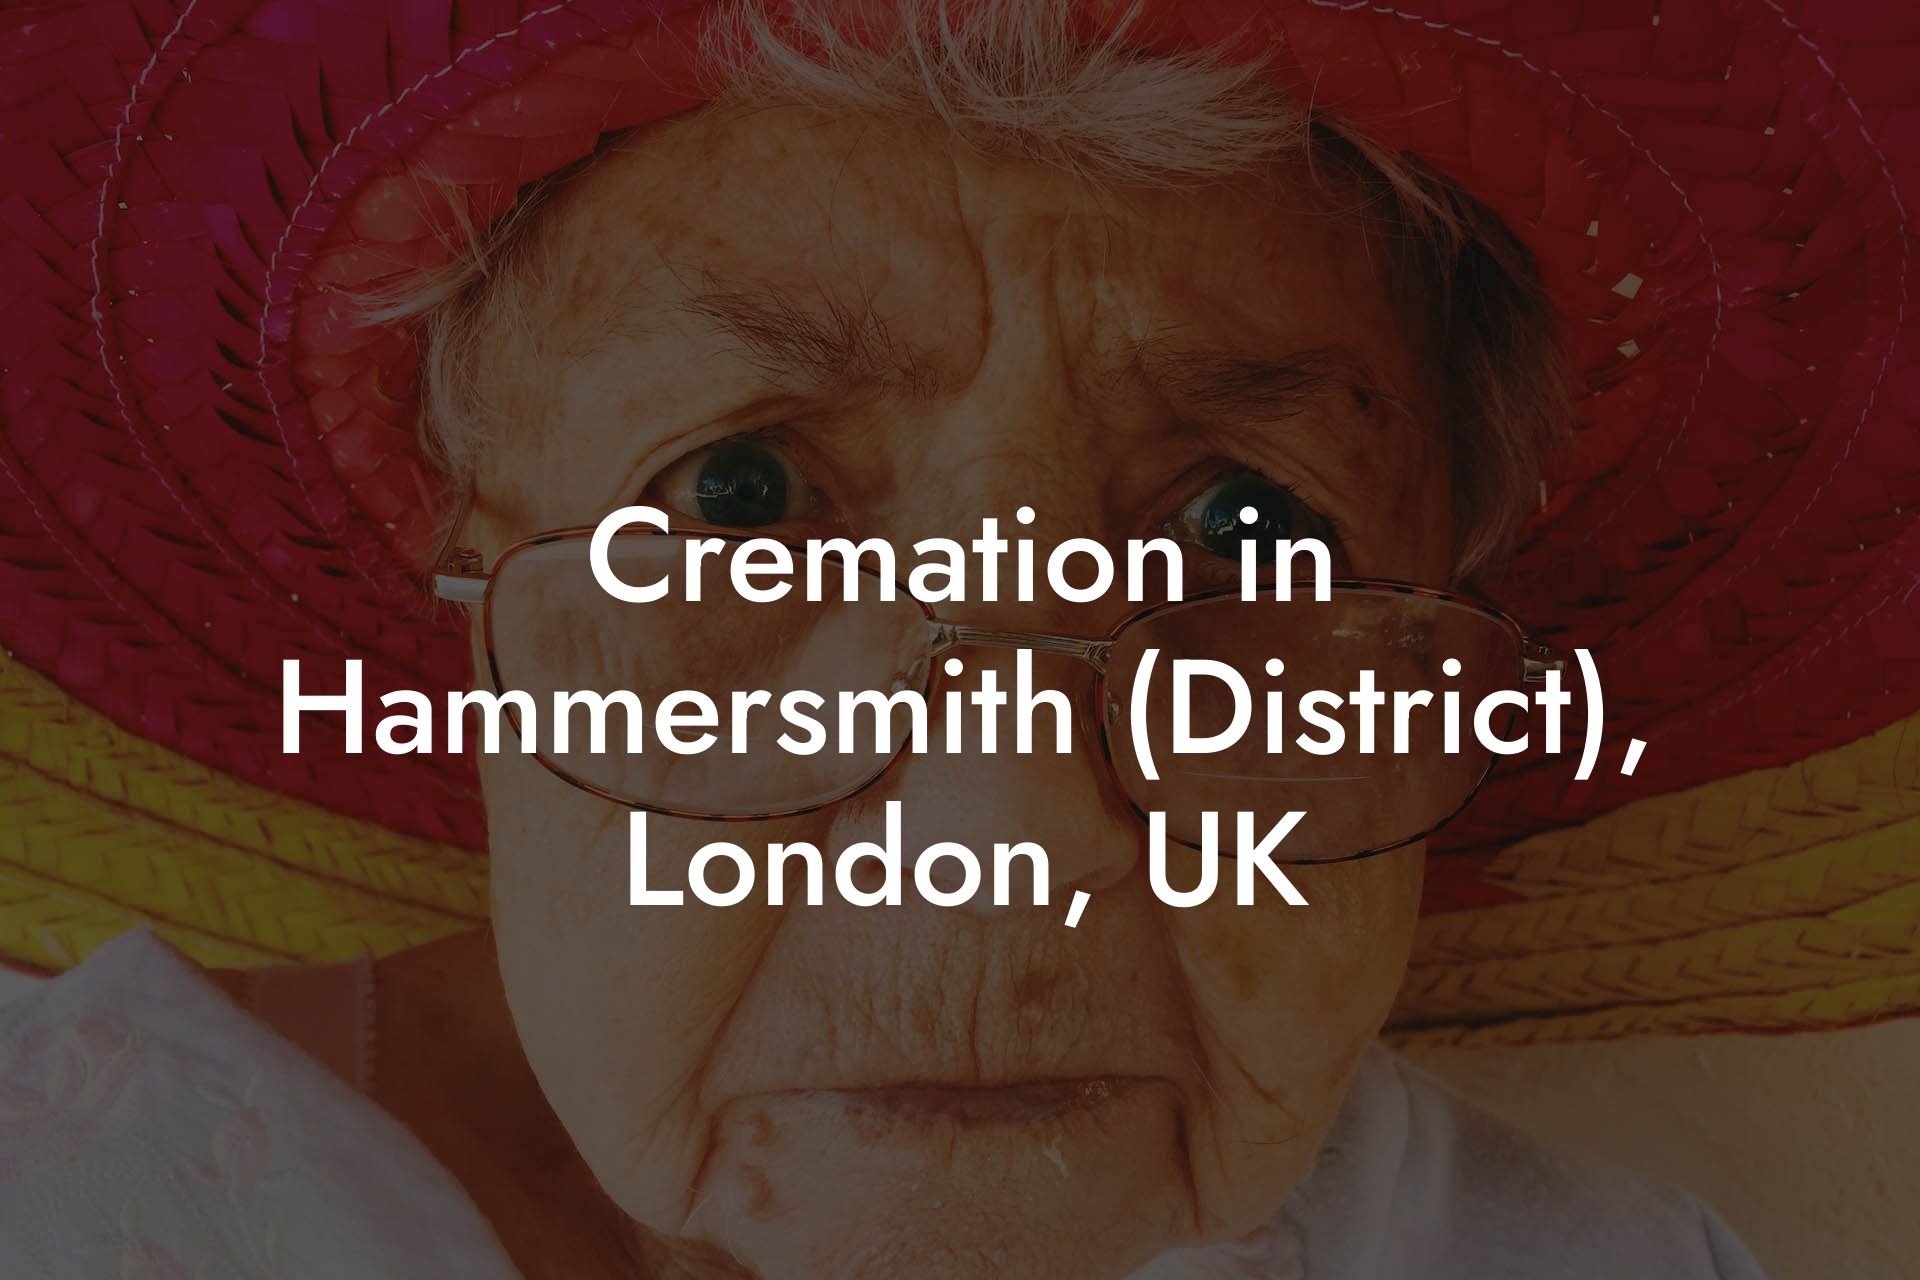 Cremation in Hammersmith (District), London, UK